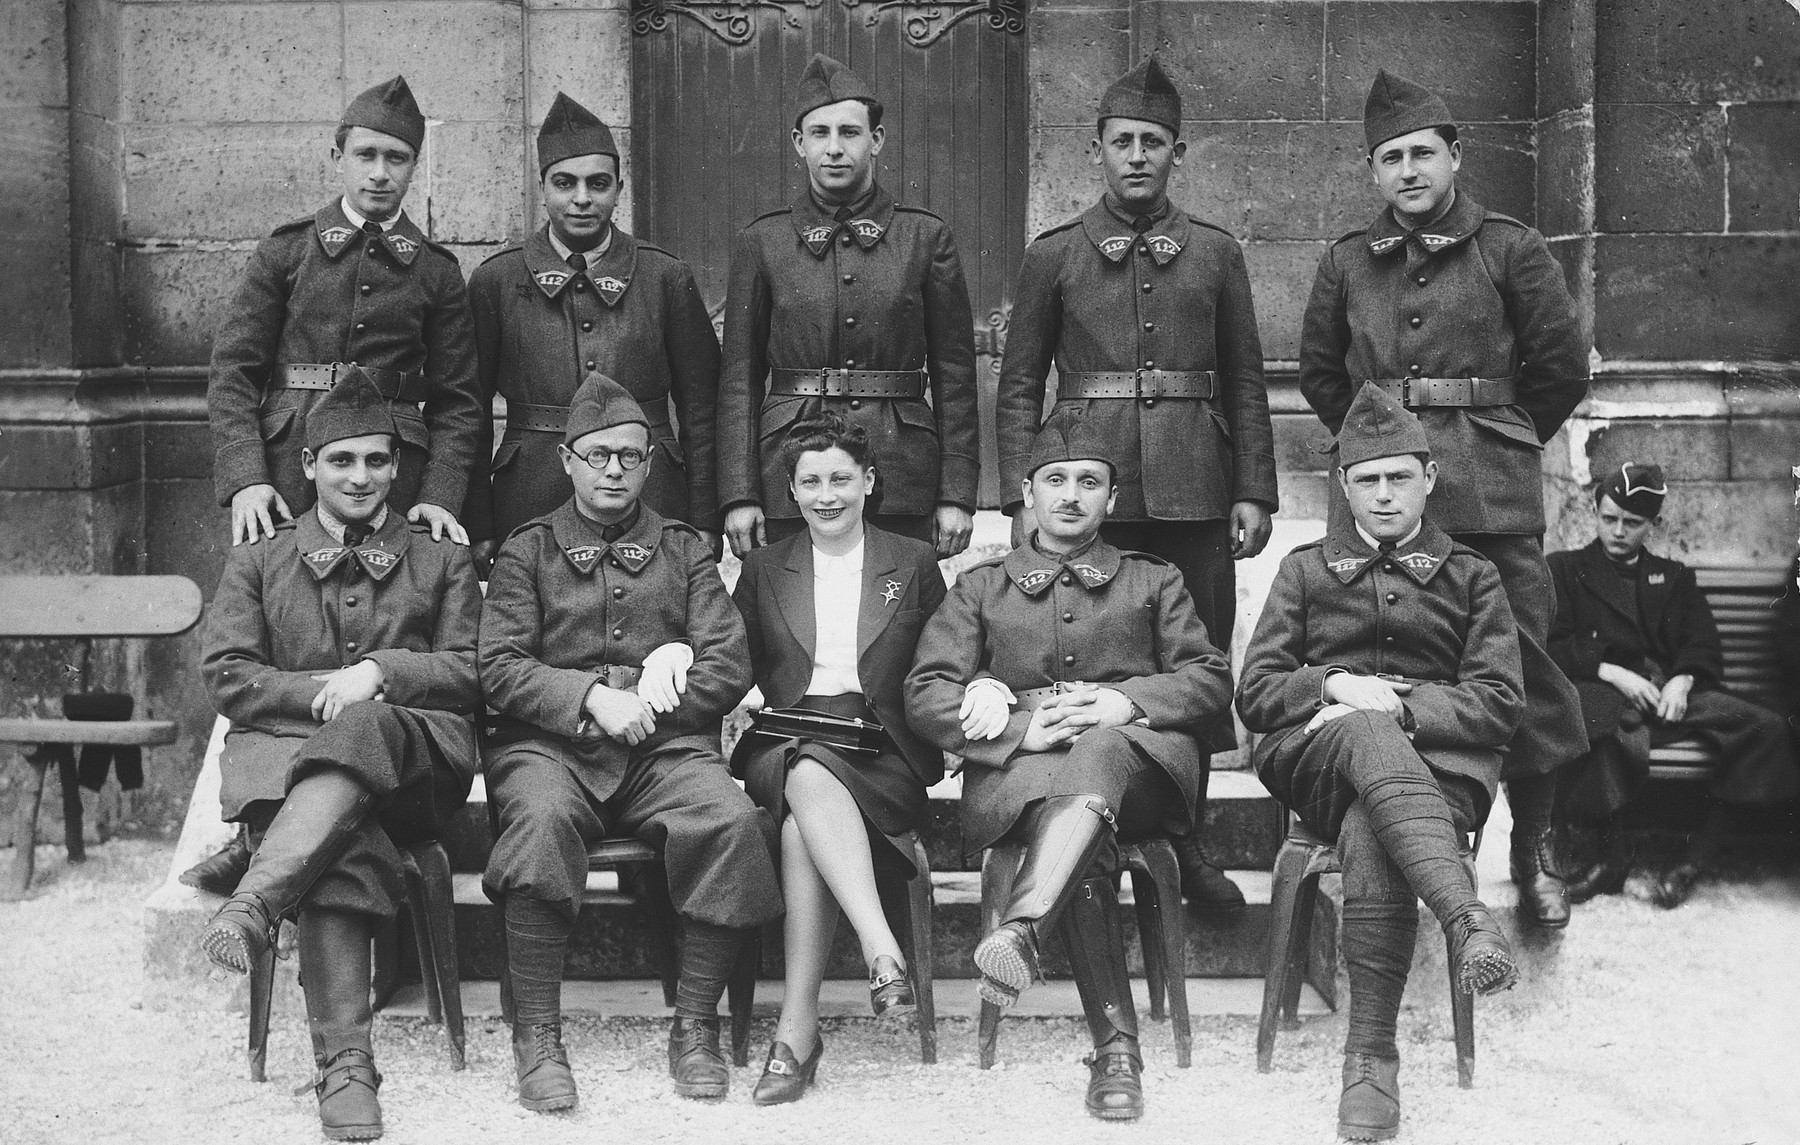 Group portrait of French soldiers shortly after the German invasion.

Among those pictured is Mattieu Findling (first row, far right), a foreign born Jew in the French army.